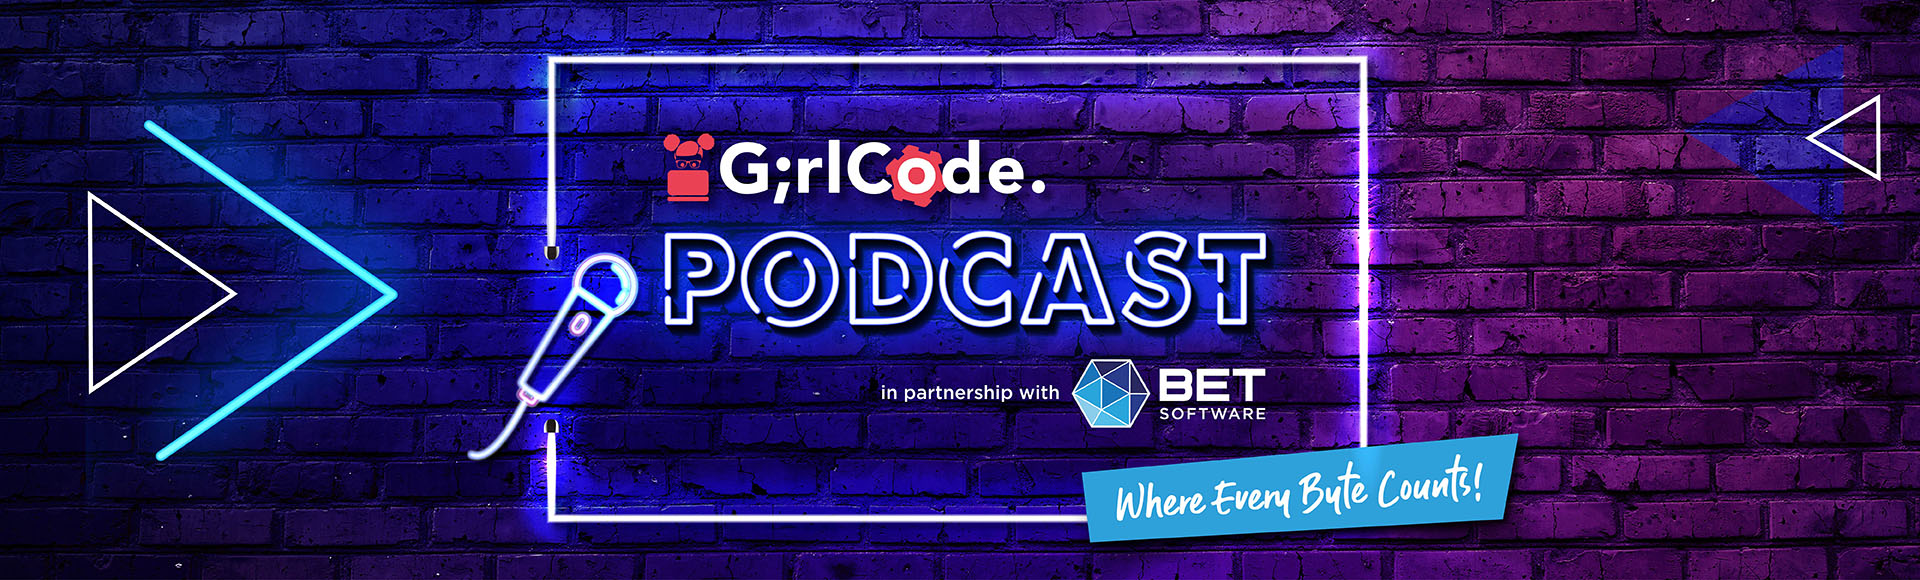 girlcode bet podcast high Podcasts